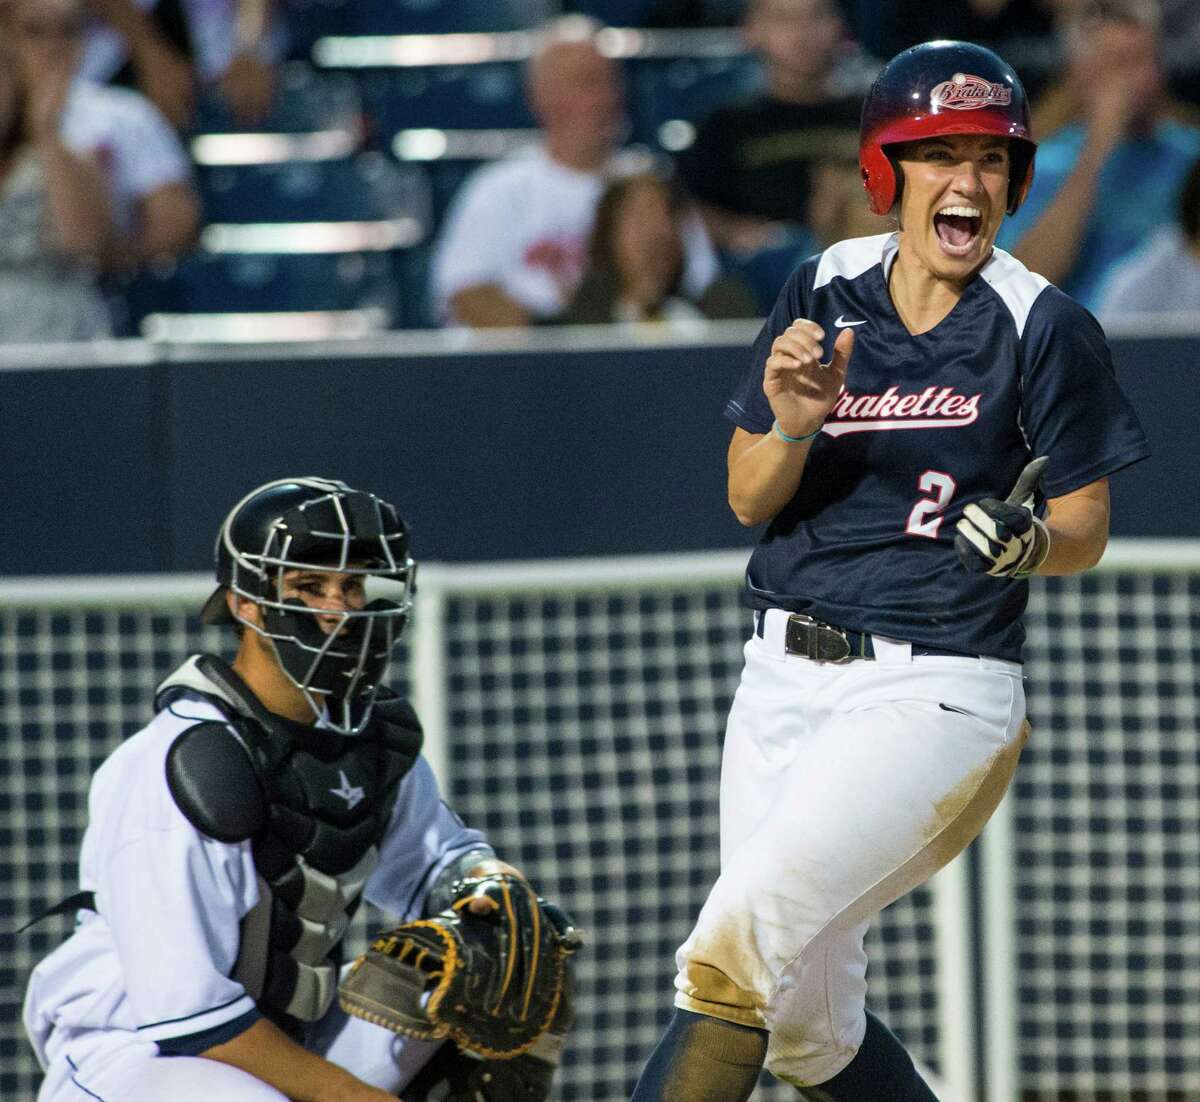 Mandie Fishback of the Stratford Brakettes celebrates scoring a run in the top of the 5th inning during a softball game against the Bridgeport Bluefish played at the Ballpark at Harbor Yard, Bridgeport, CT on Sunday, July, 20th, 2014.